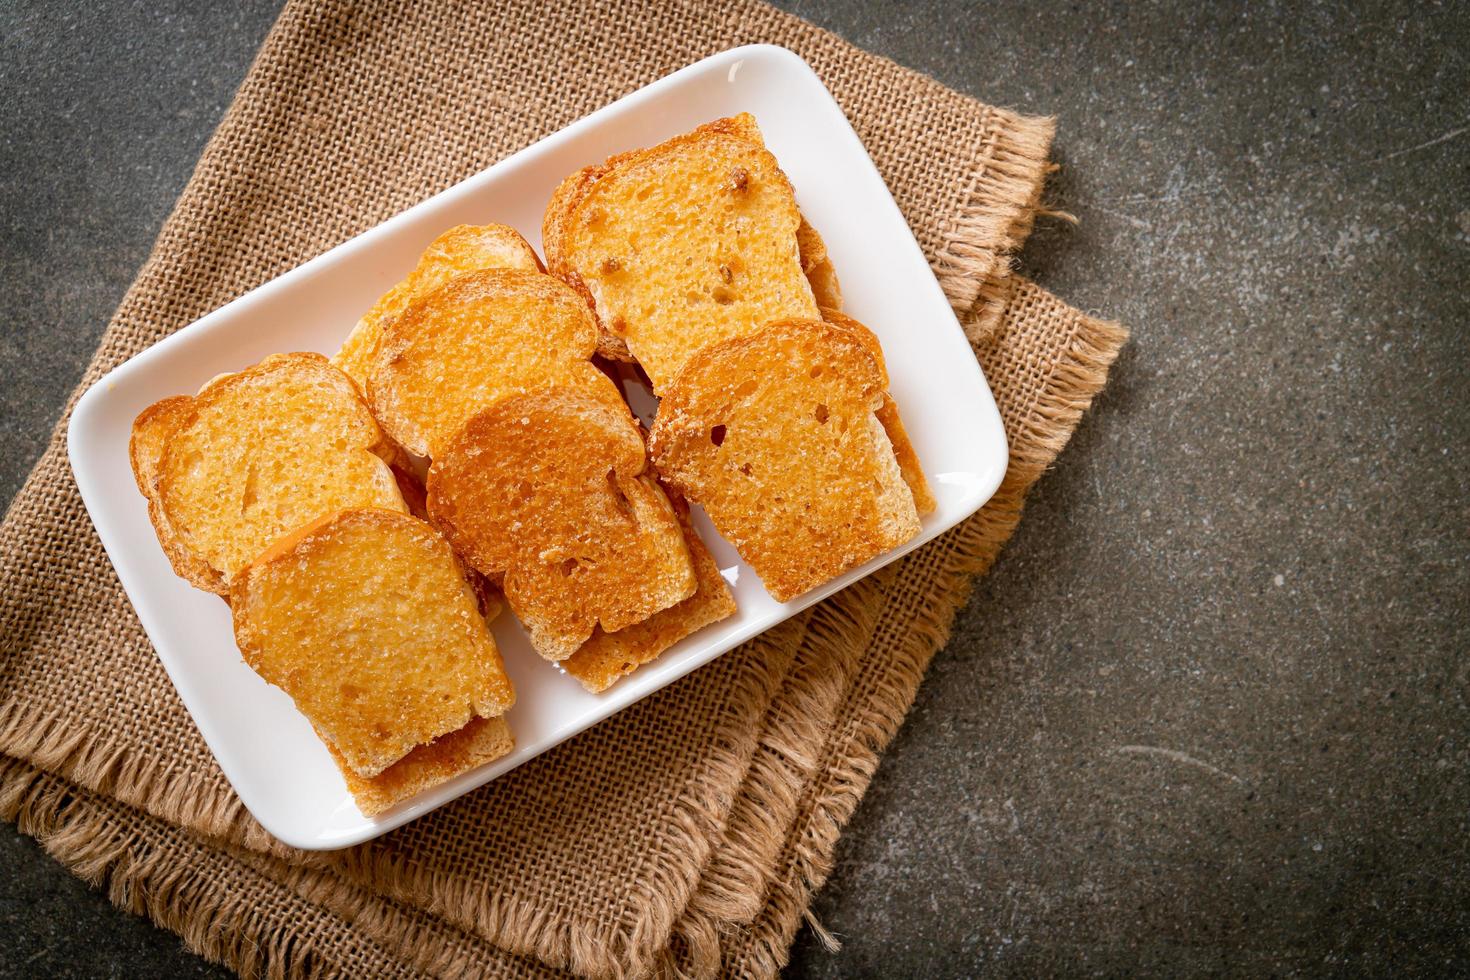 Baked crispy bread with butter and sugar on plate photo